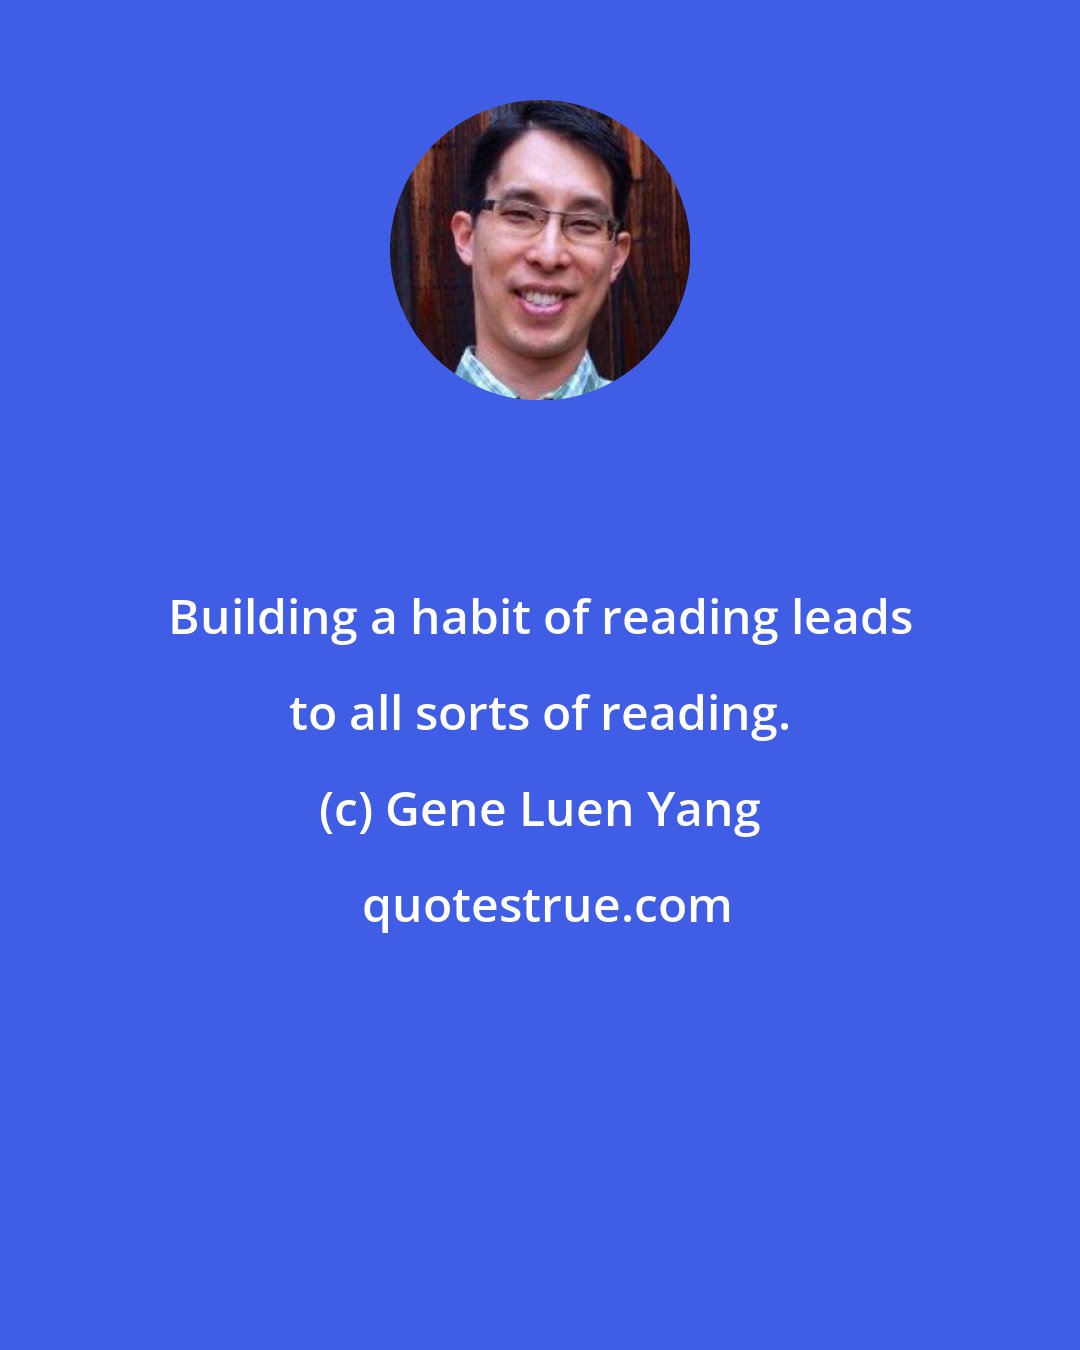 Gene Luen Yang: Building a habit of reading leads to all sorts of reading.